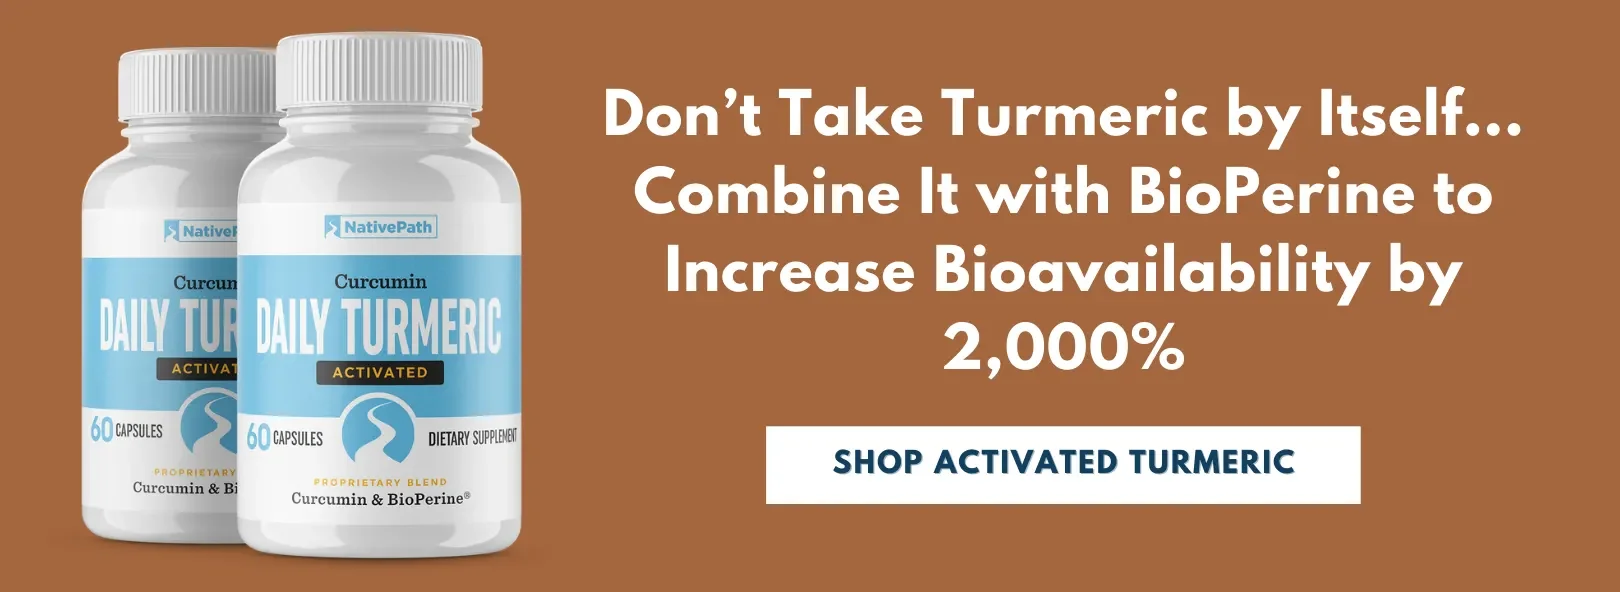 Don’t Take Turmeric by Itself... Combine It with BioPerine to Increase Bioavailability by 2,000%. Shop NativePath Activated Turmeric Capsules.